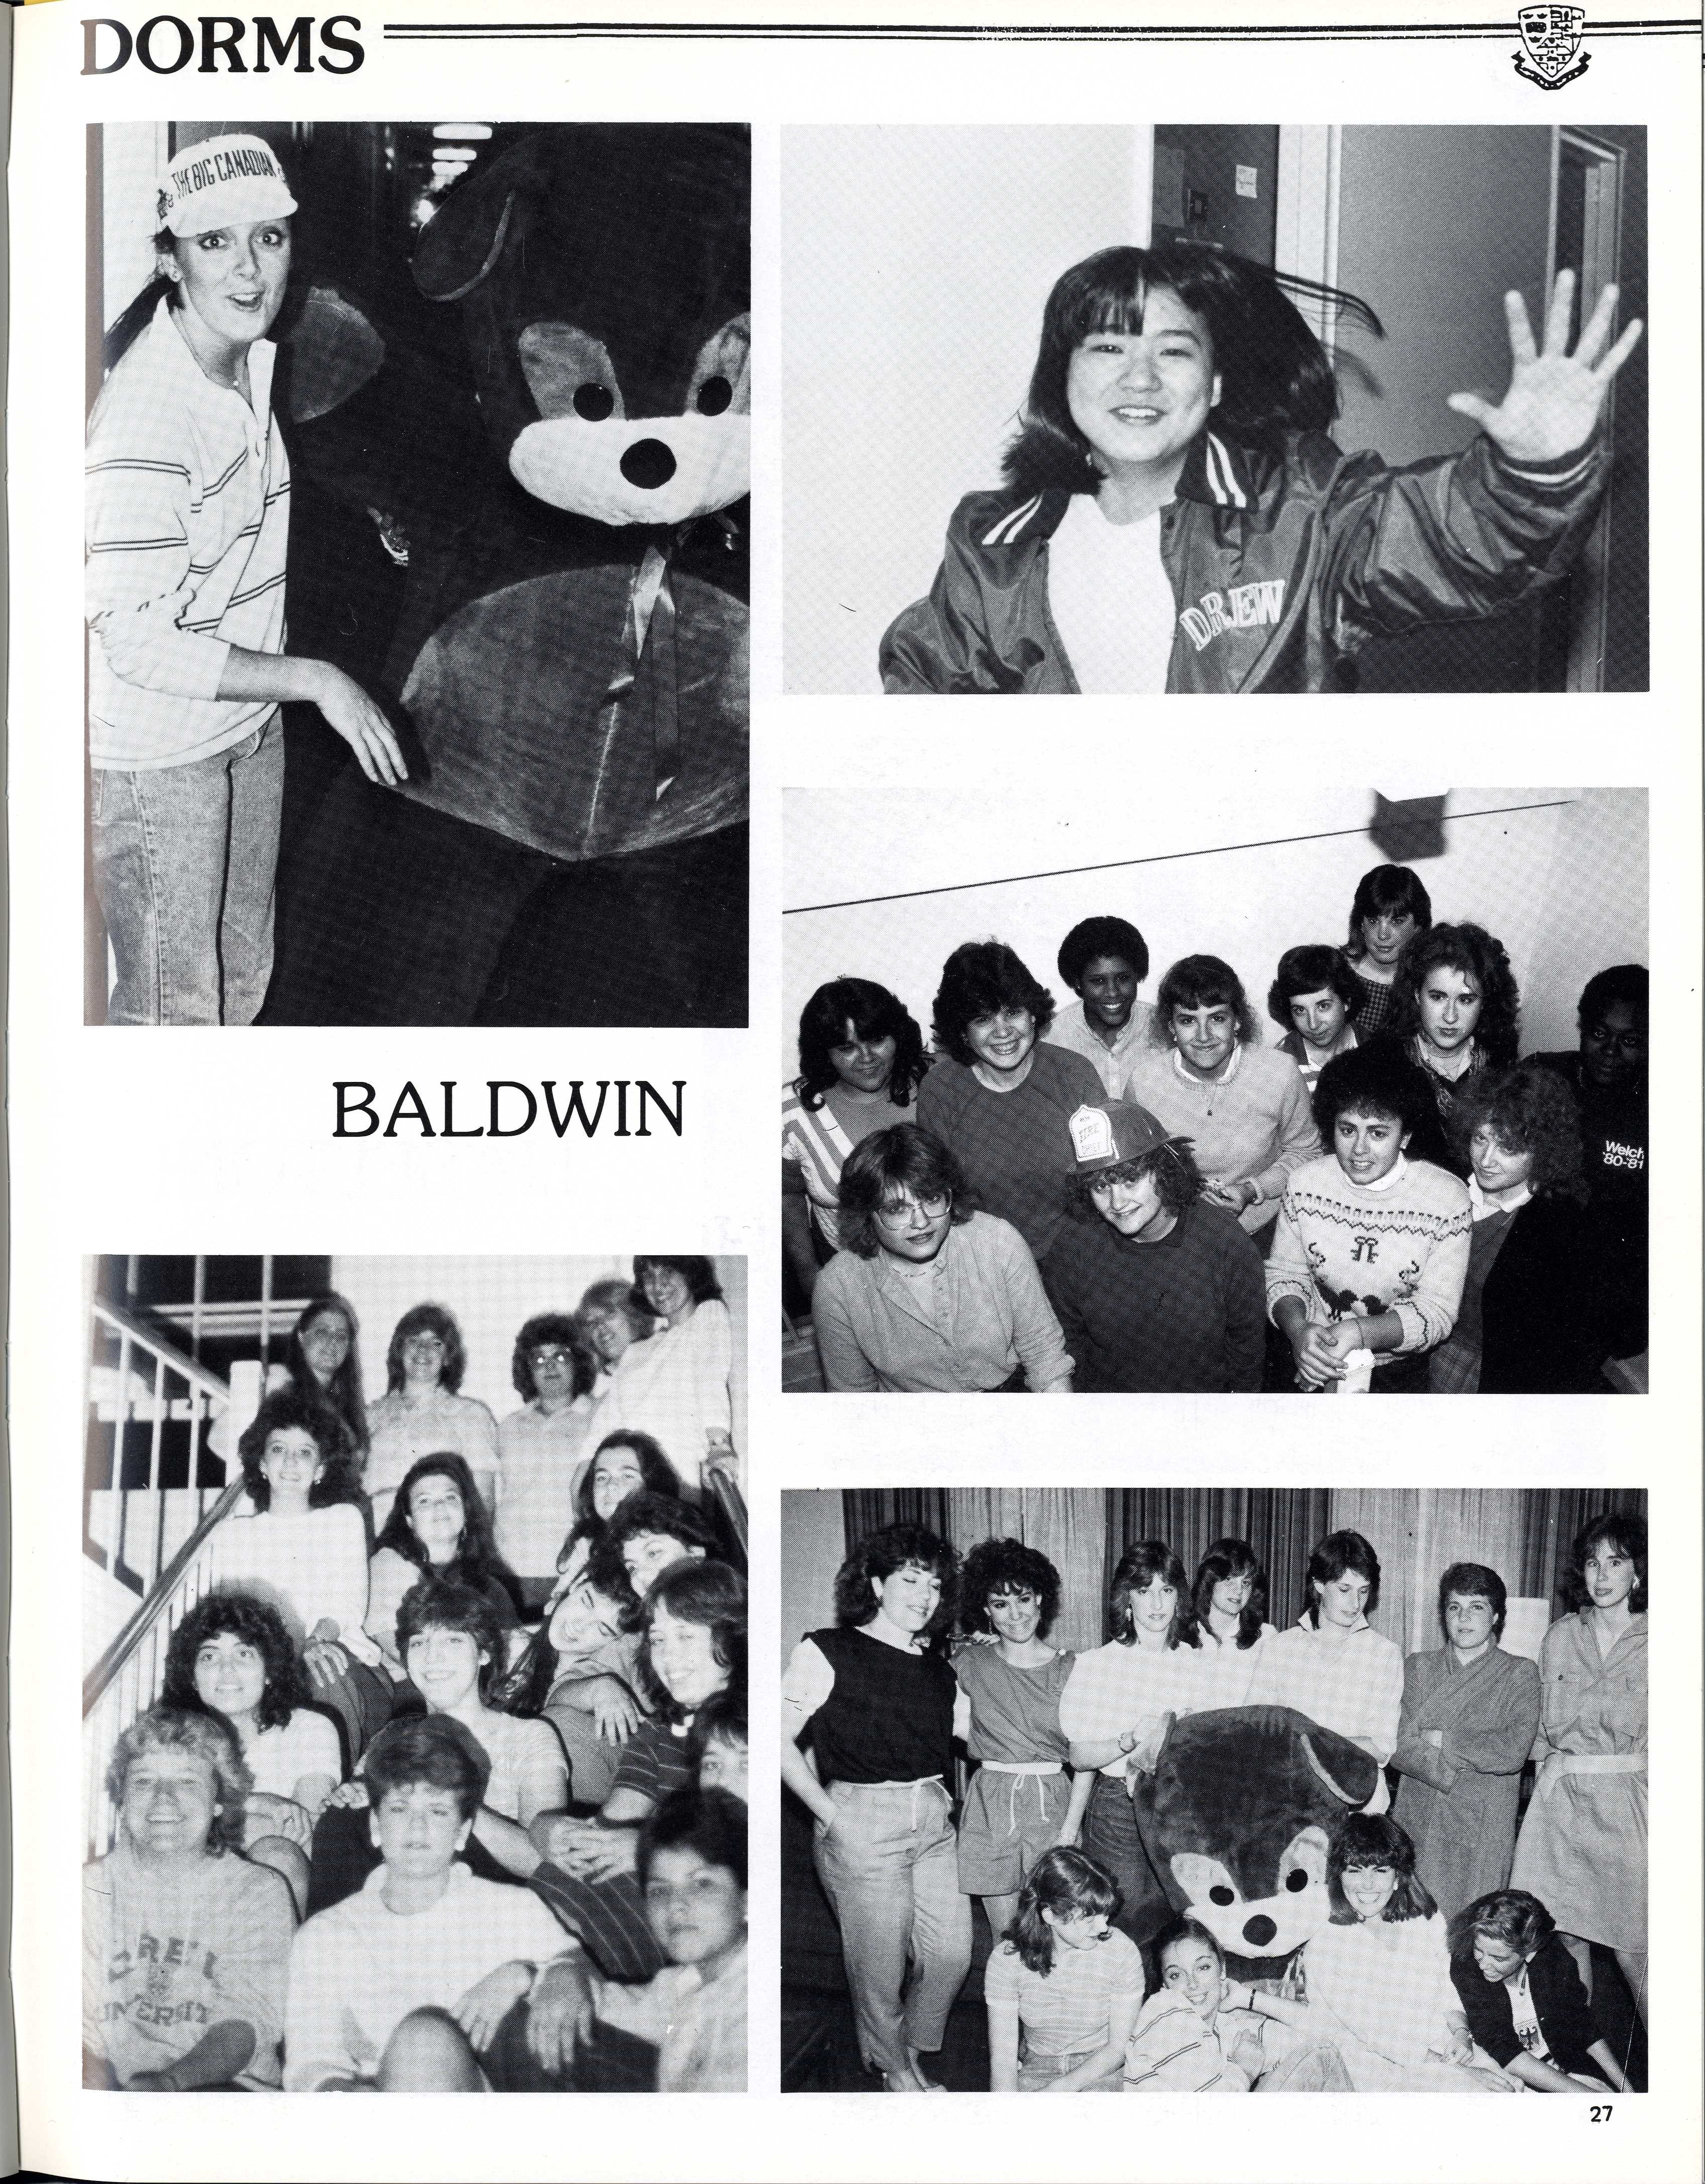 This is around the time Baldwin began housing exclusively women rather than men.